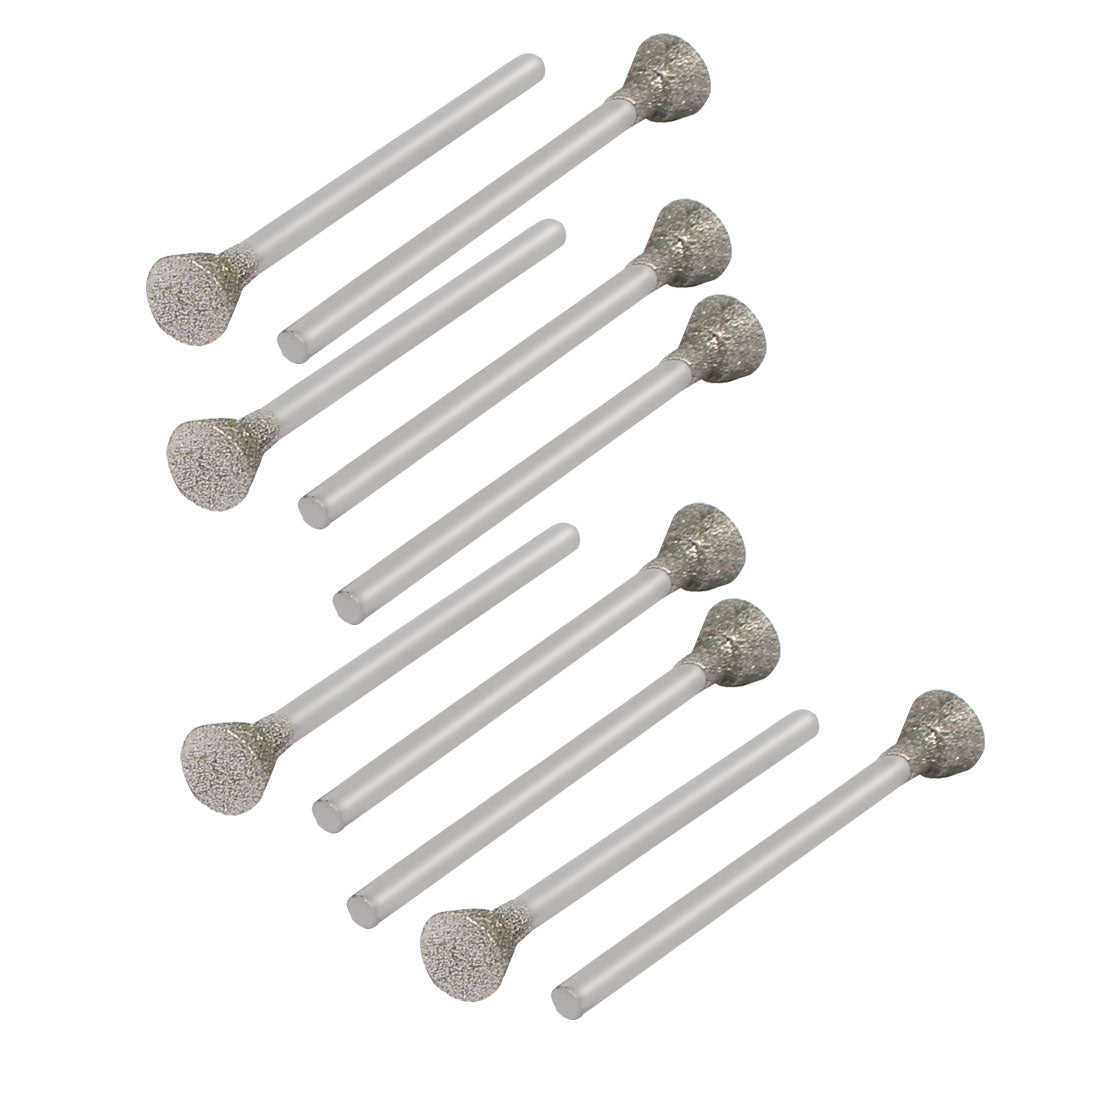 uxcell Uxcell 2.35mmx6mm Diamond Coated Inverted Cone Mounted Points Grinding Bits 10pcs